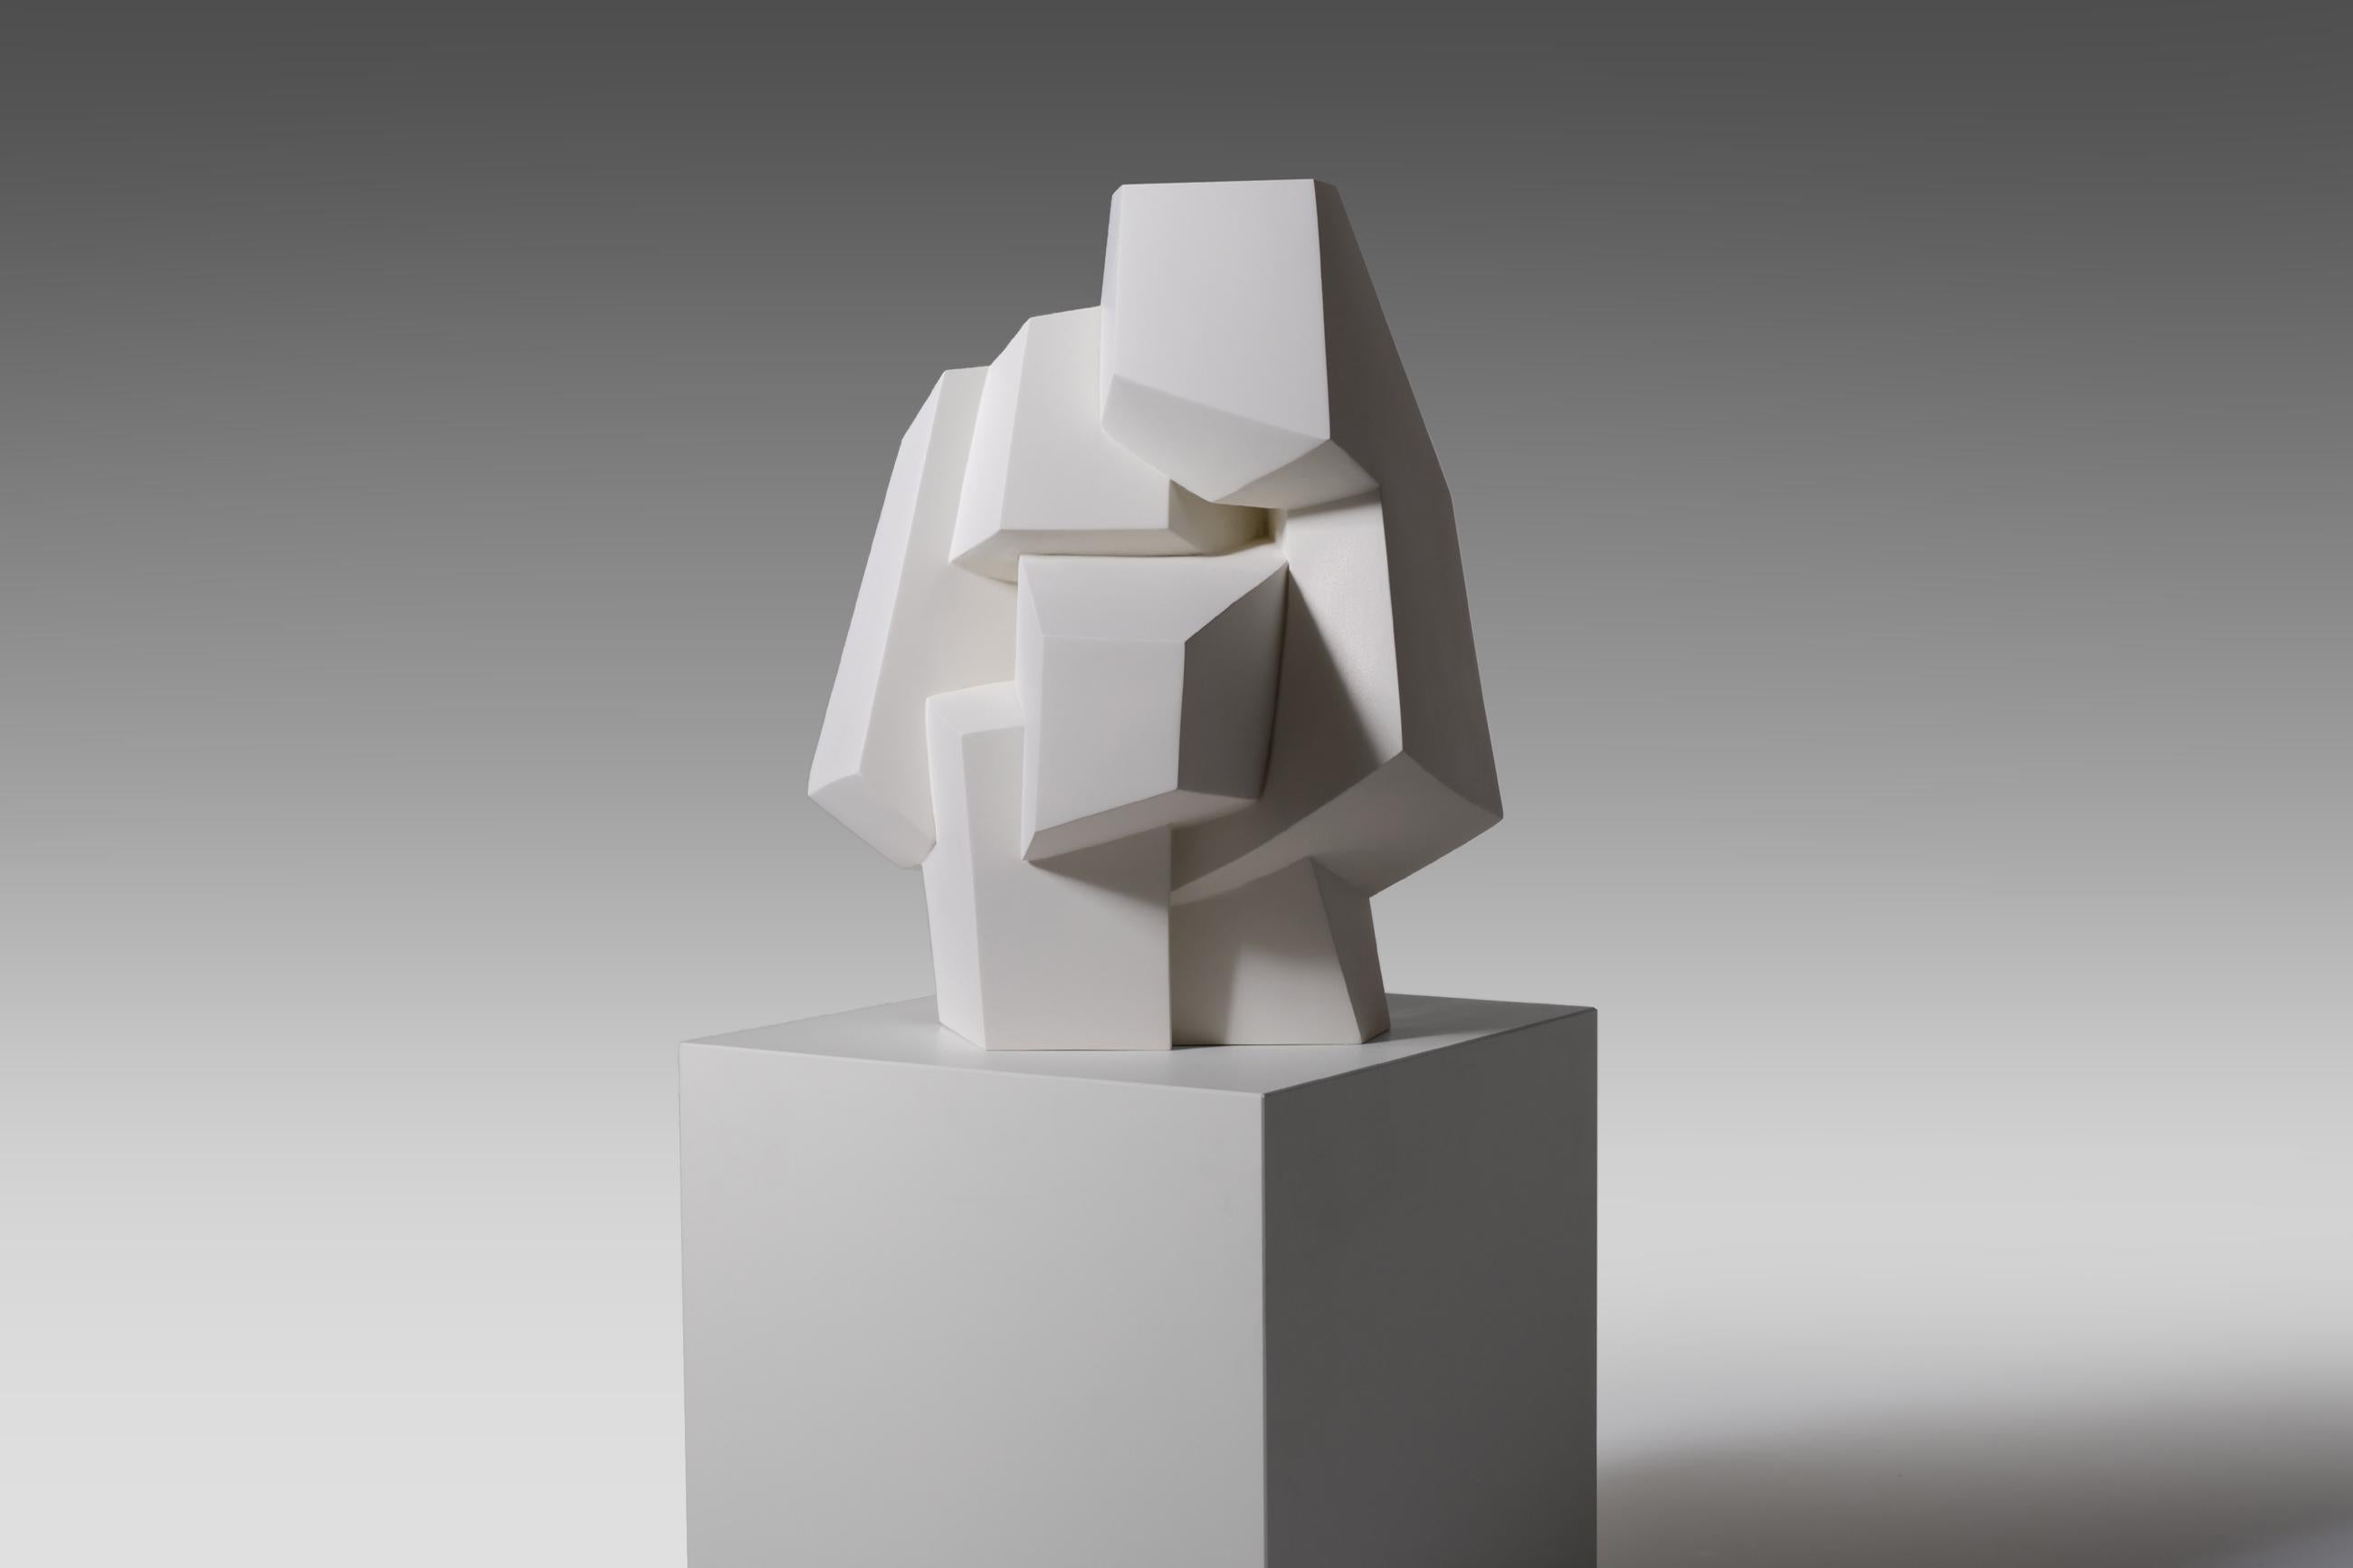 Large abstract cubistic sculpture, 1960s. The work is sculpted out of plaster and has very strong sharp cubistic shapes. Reminiscent of the work of André Bloc. Very interesting work. In very good condition.